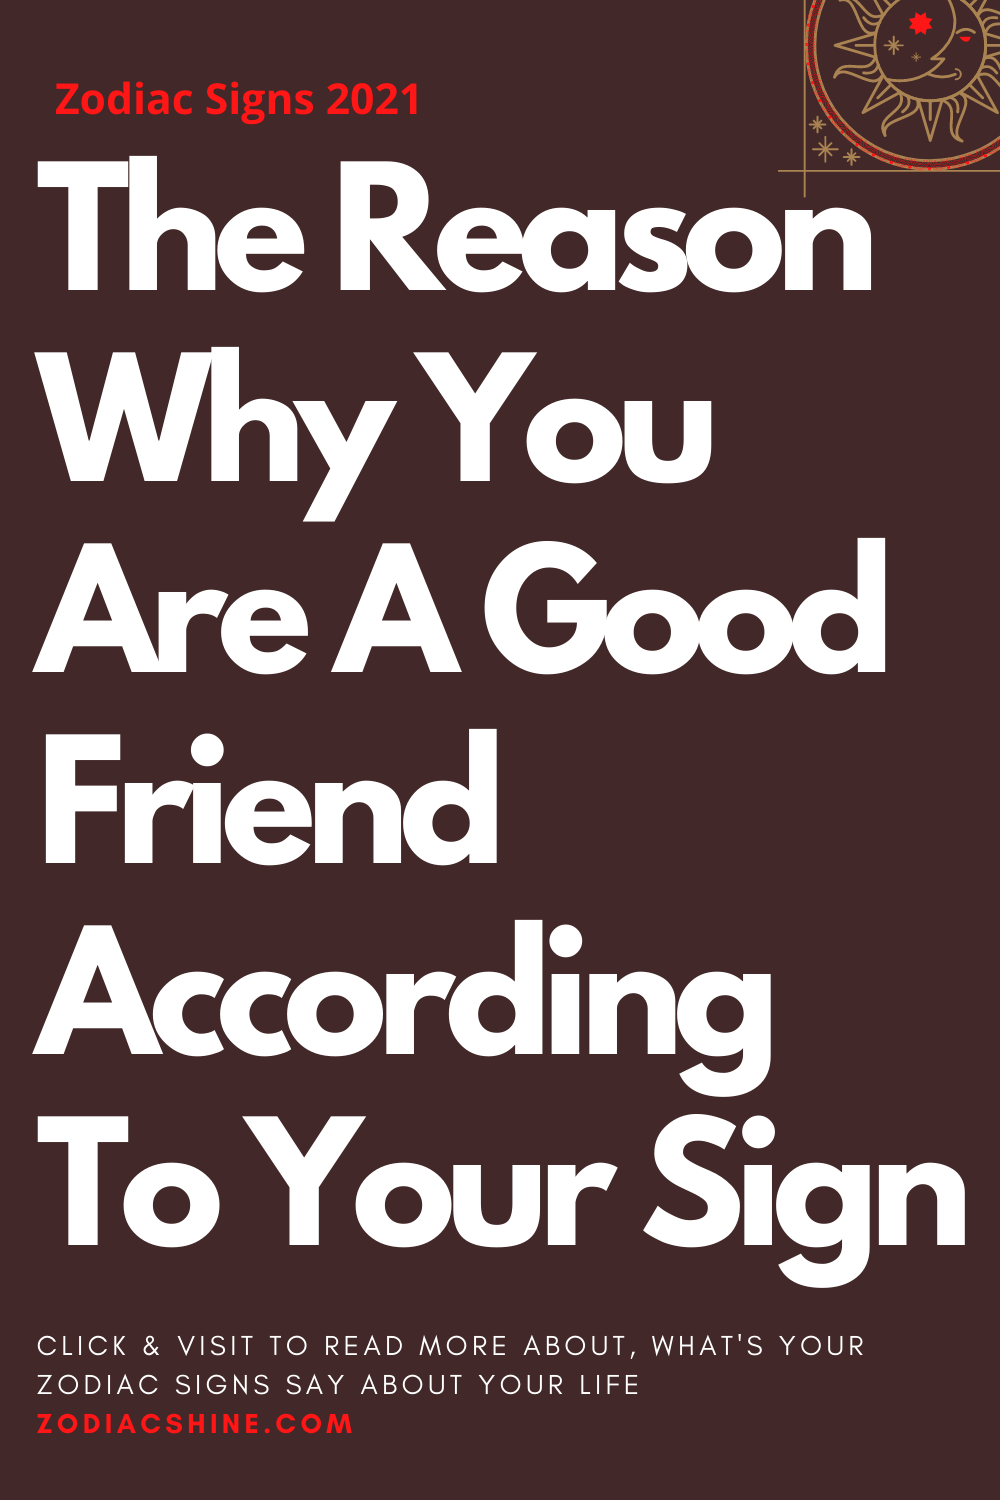 The Reason Why You Are A Good Friend According To Your Sign